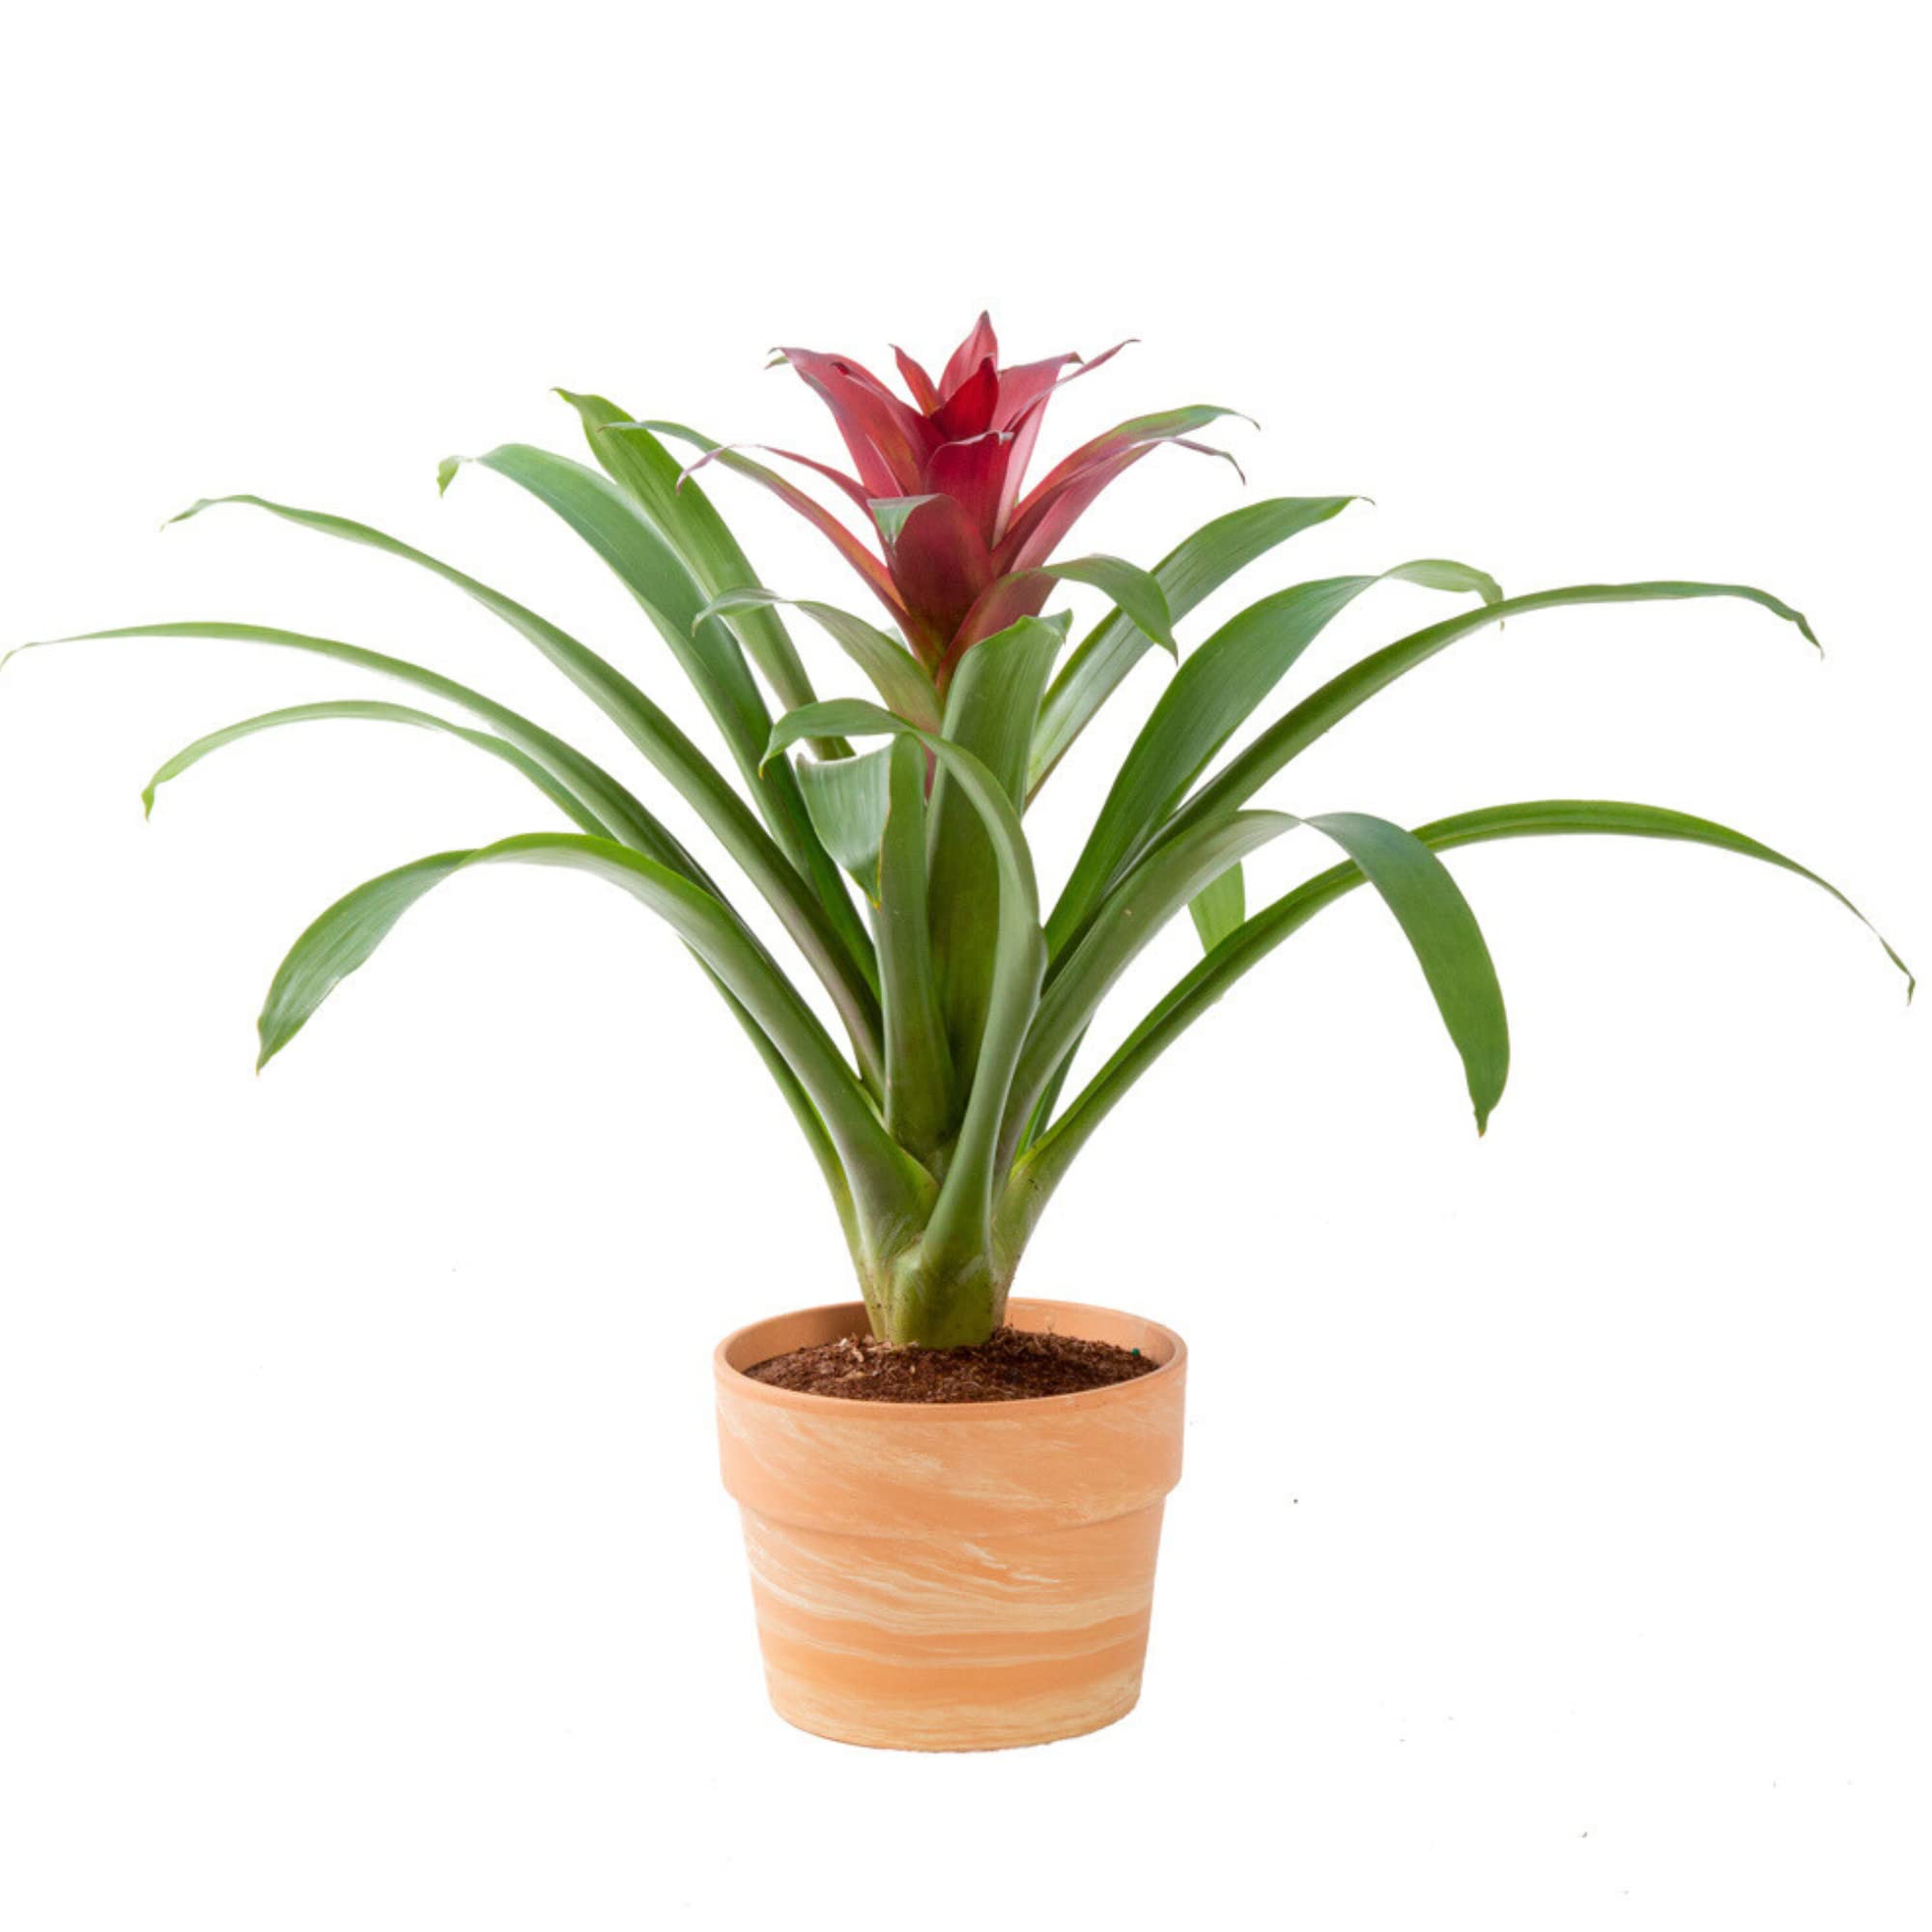 Costa Farms Grower's Choice Blooming Bromeliad Live Indoor Houseplant: 12" Tall $18.15 or 20" Tall $25.31 + Free Shipping w/ Prime